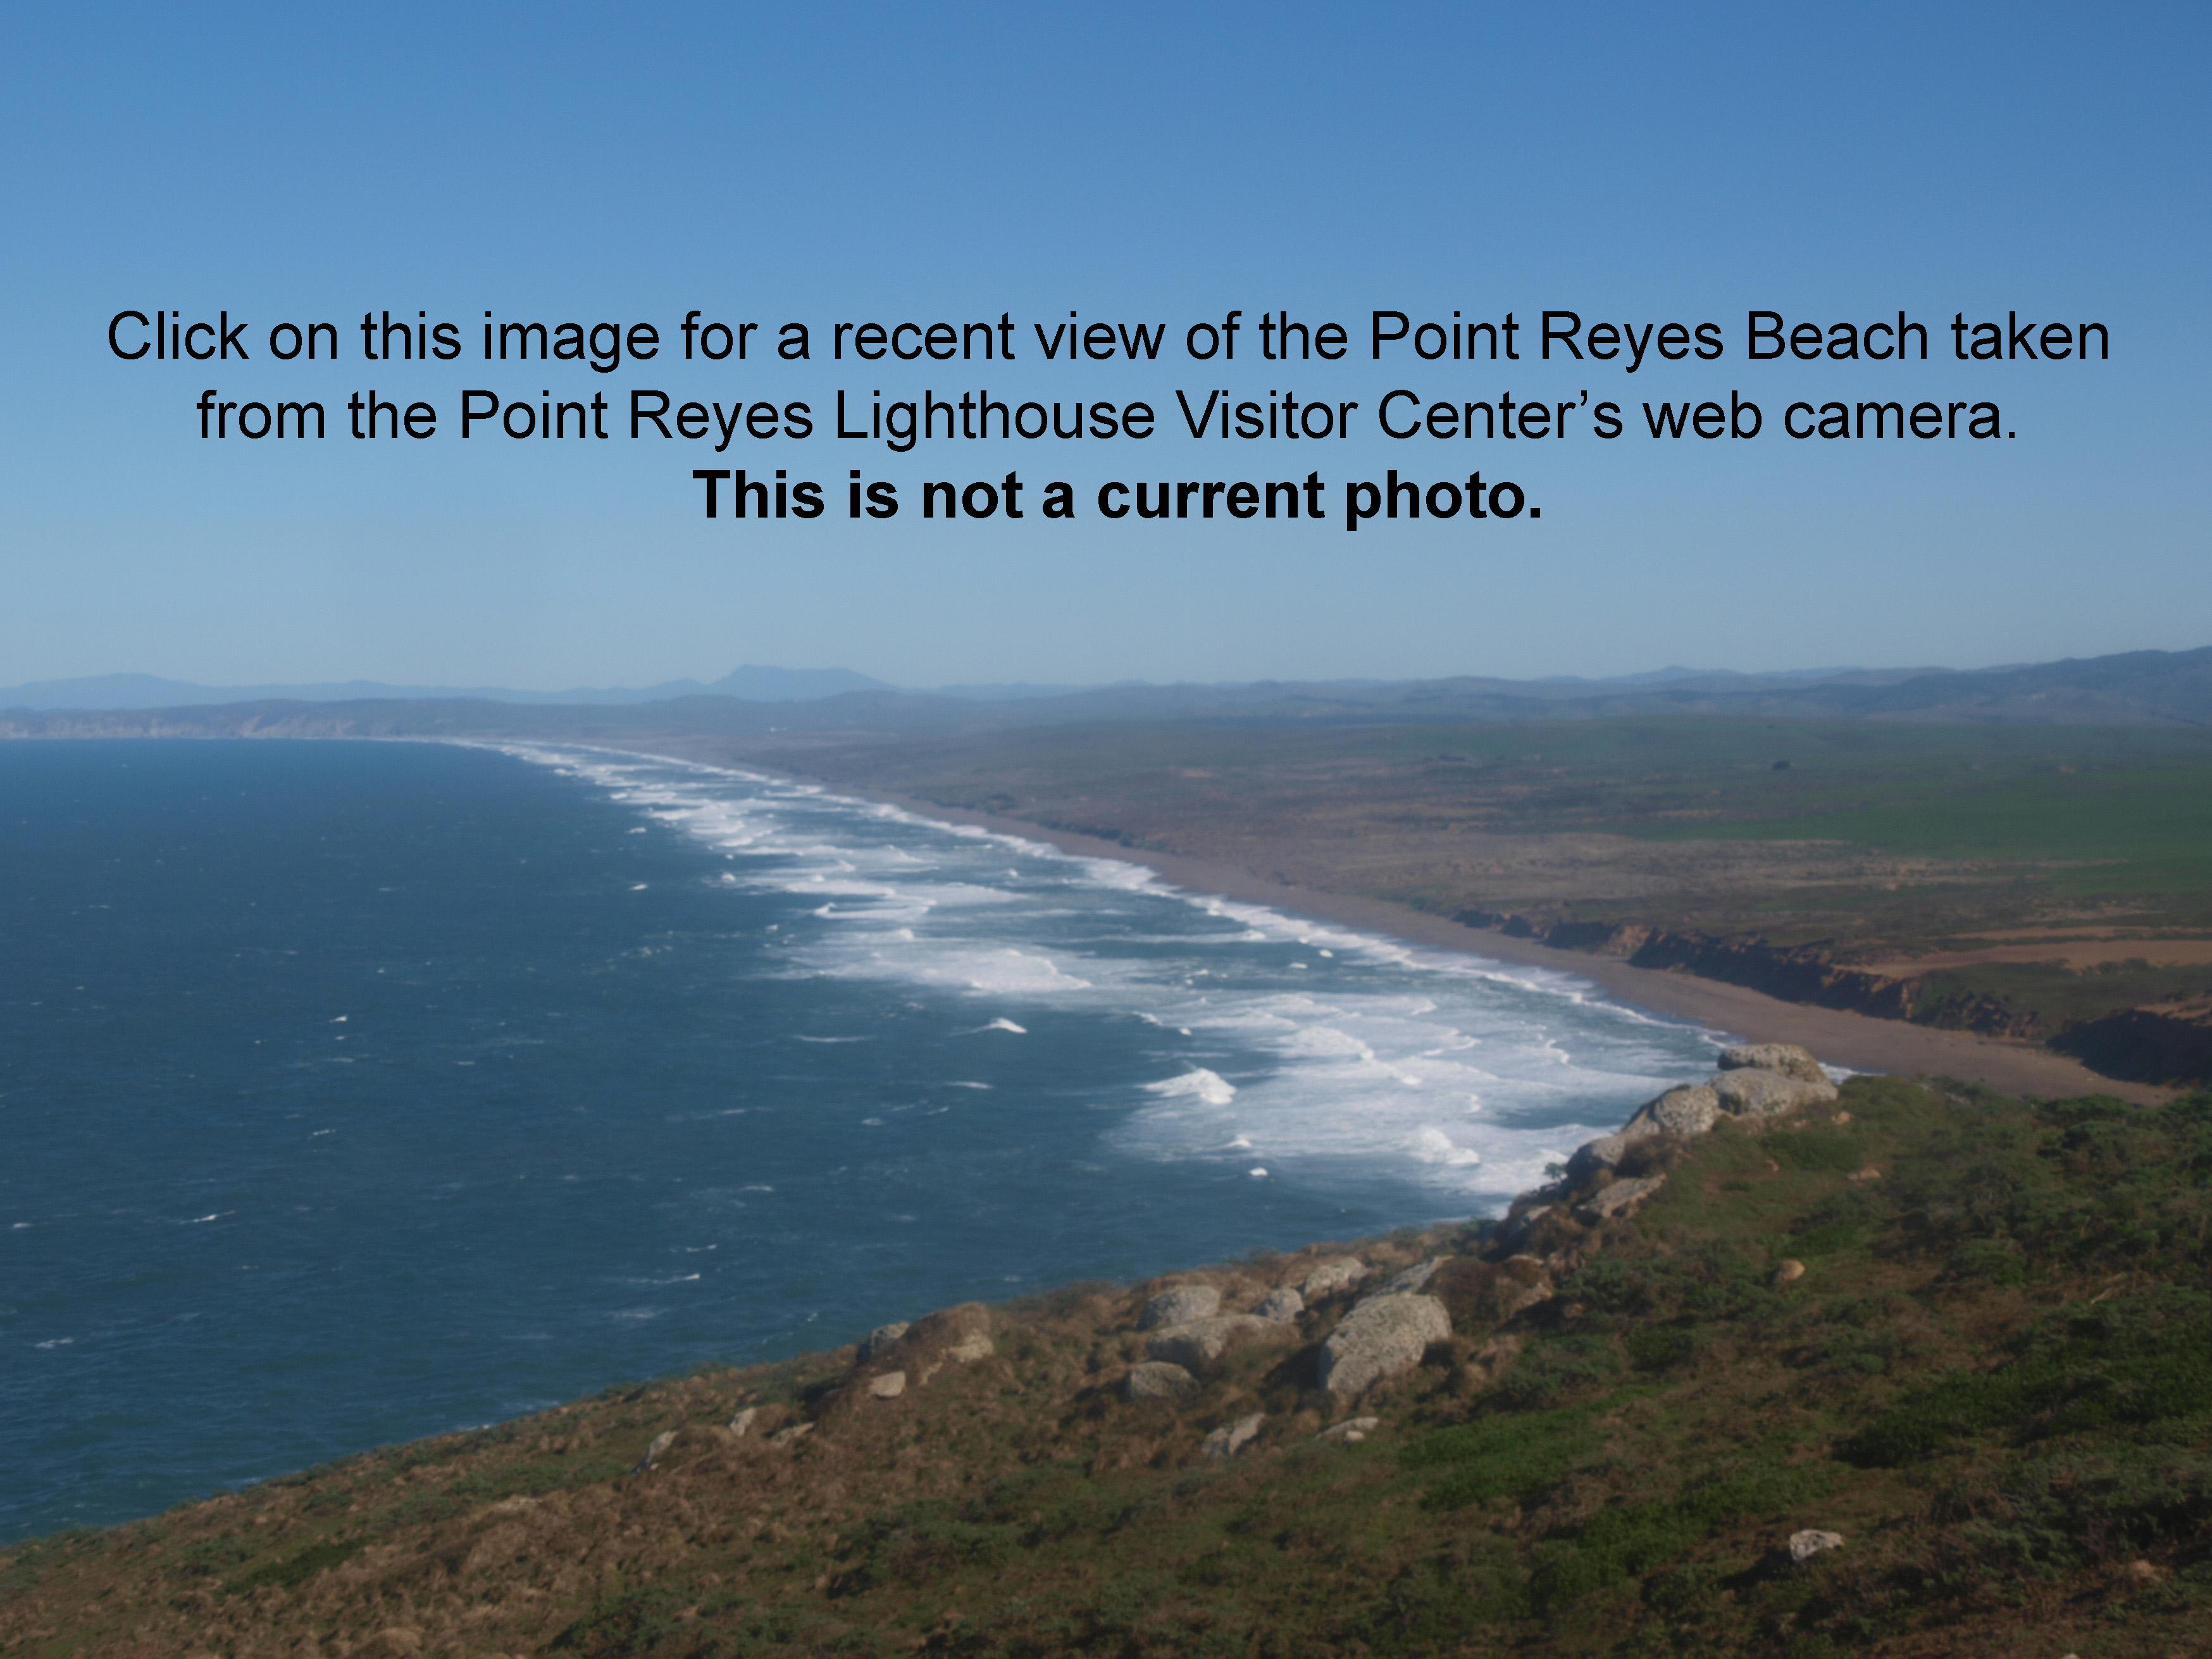 View of Point Reyes Beach Looking North-Northeast preview image